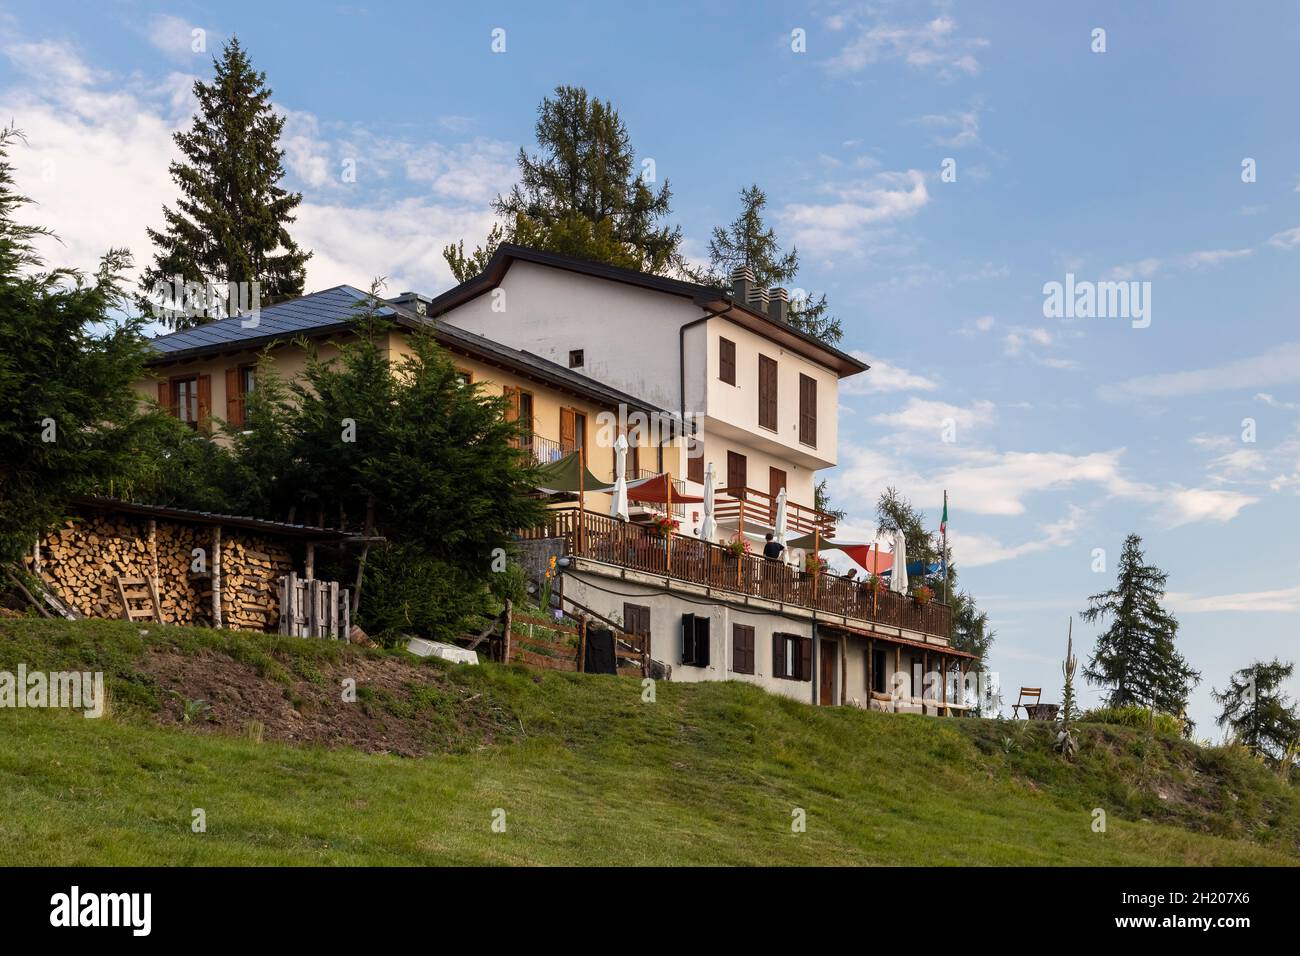 View of an the Rifugio Campiglio at Monte Lema, Dumenza, Varese district, Lombardy, Italy. Stock Photo